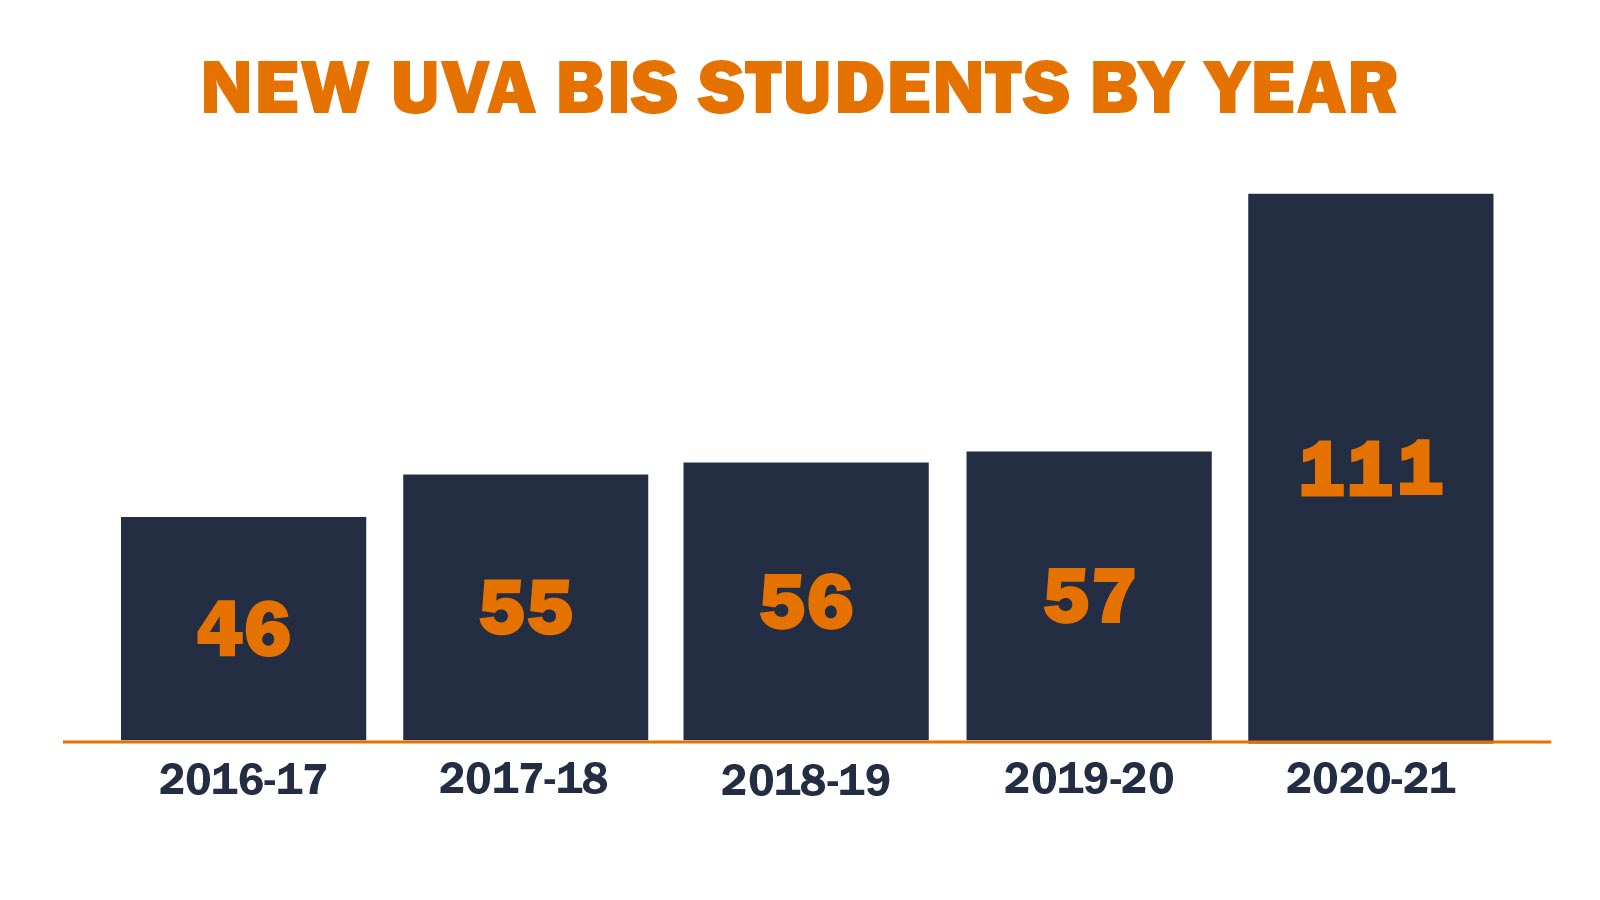 A bar graph tracks year-over-year enrollment in the Bachelor of Interdisciplinary Studies program, growing from 46 students in 2016-17 to 111 in 2020-21.